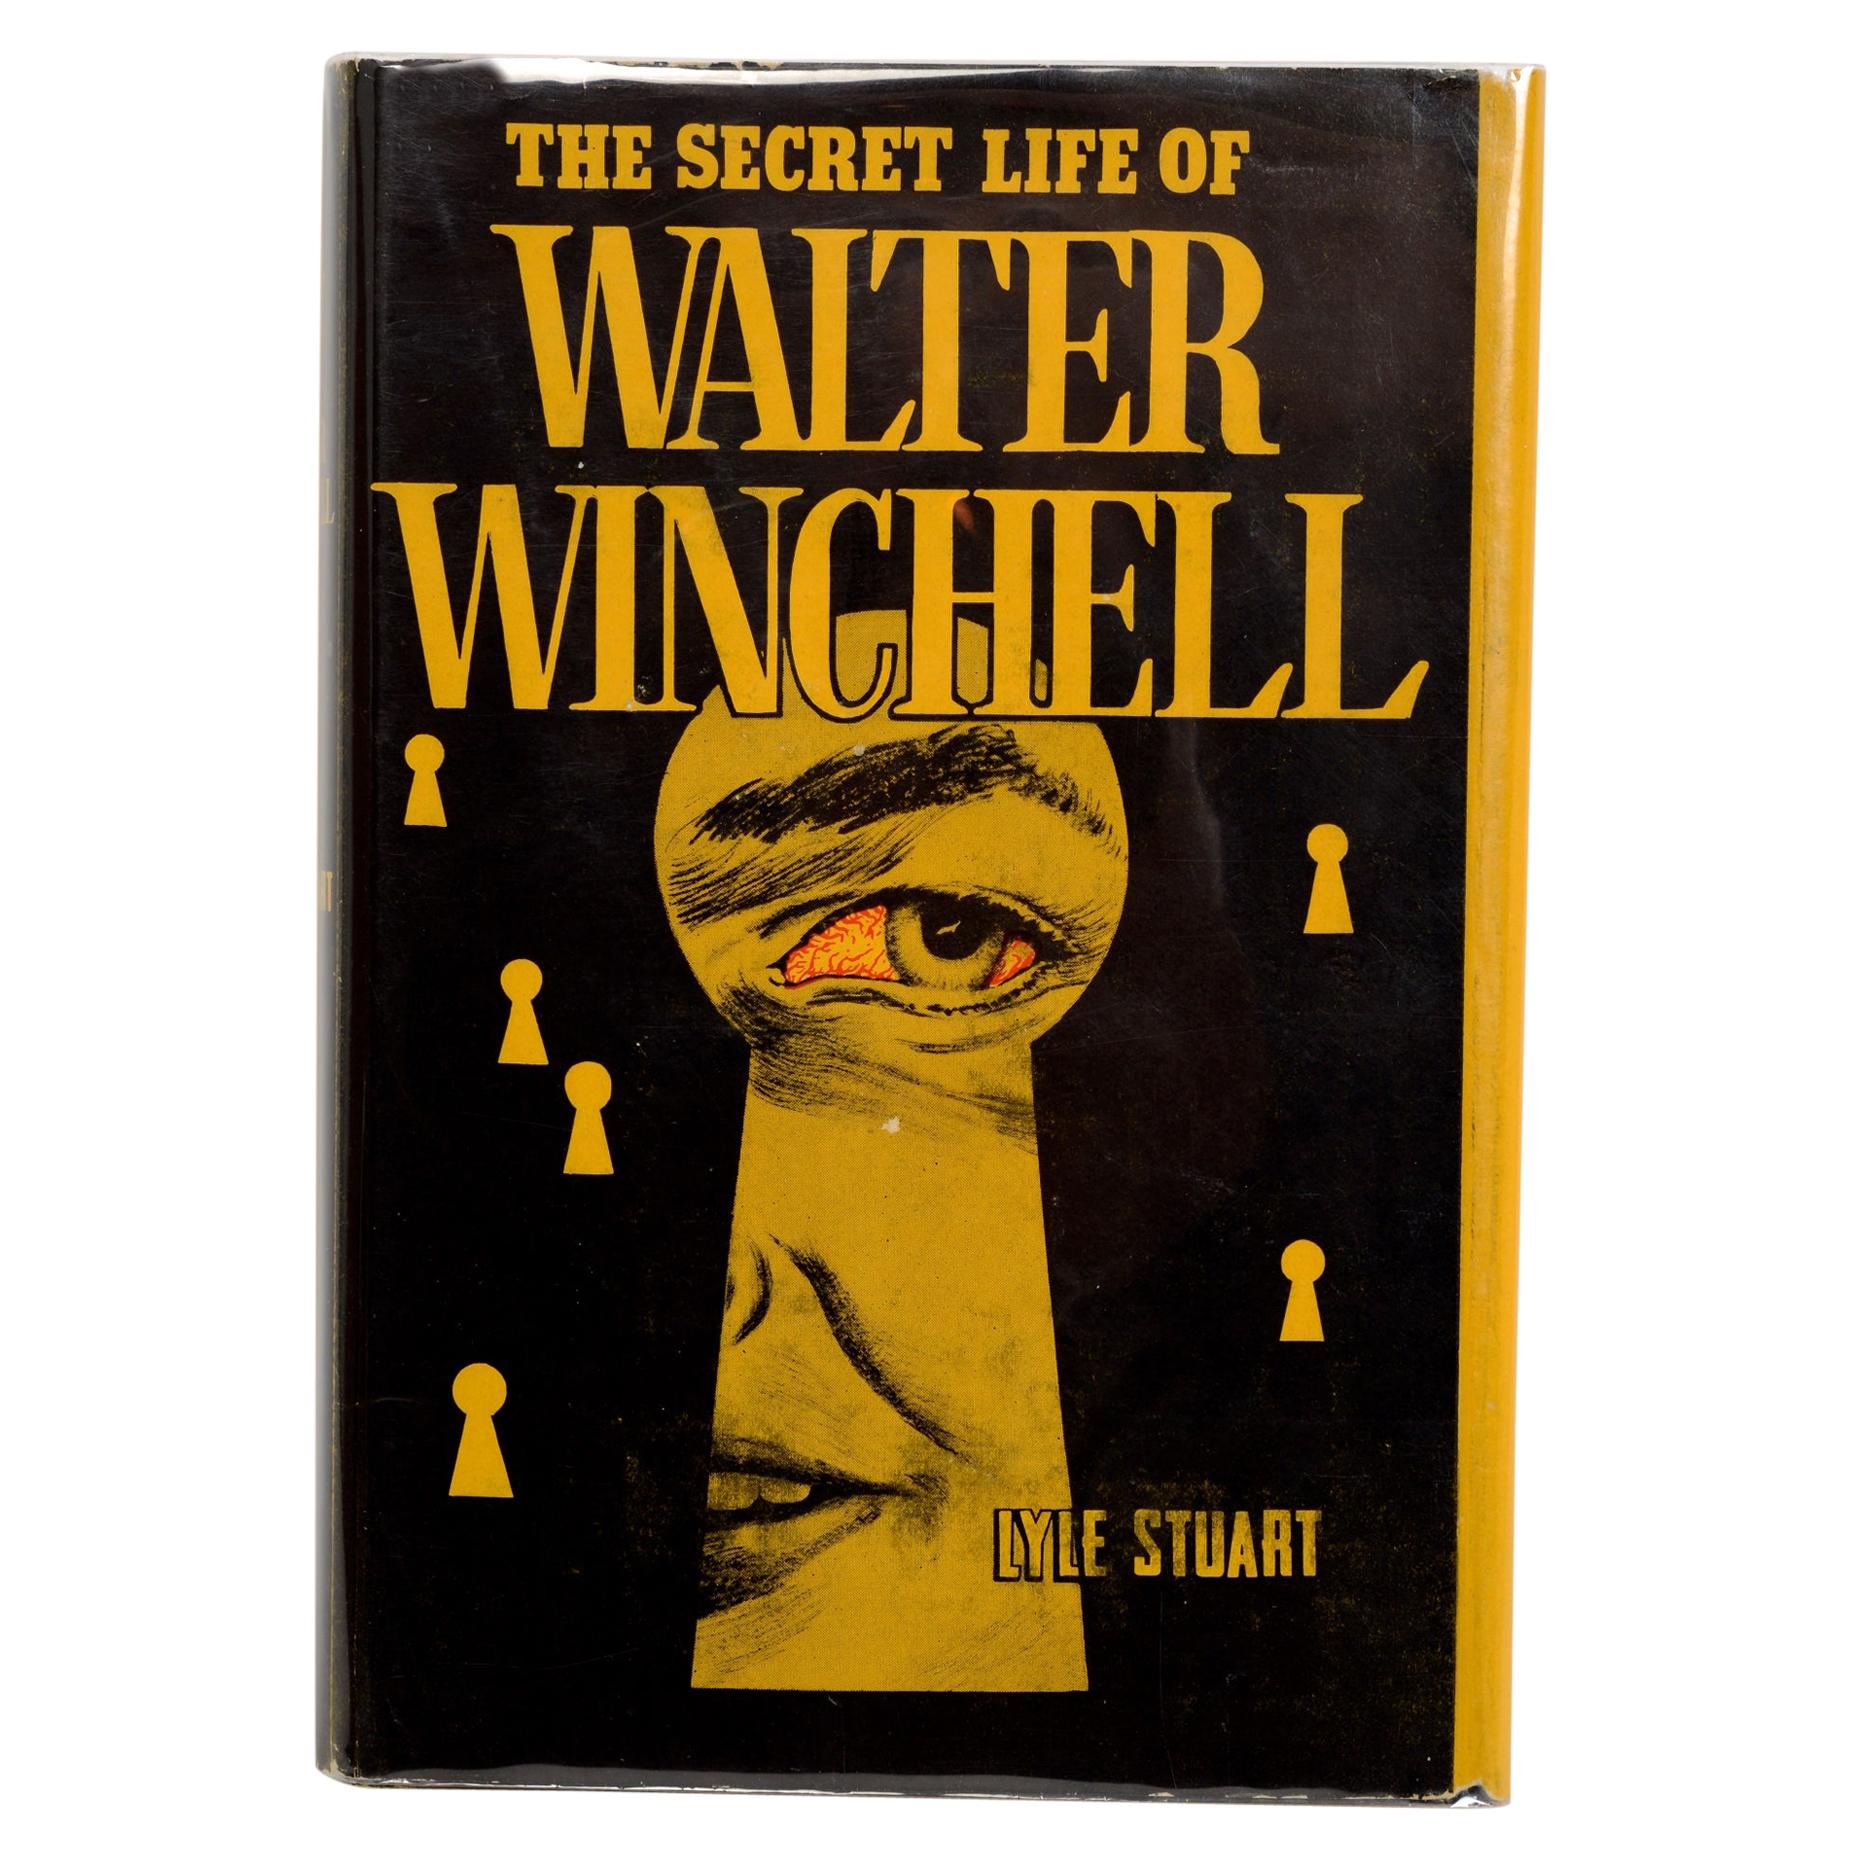 The Secret Life of Walter Winchell by Lyle Stuart, First Edition